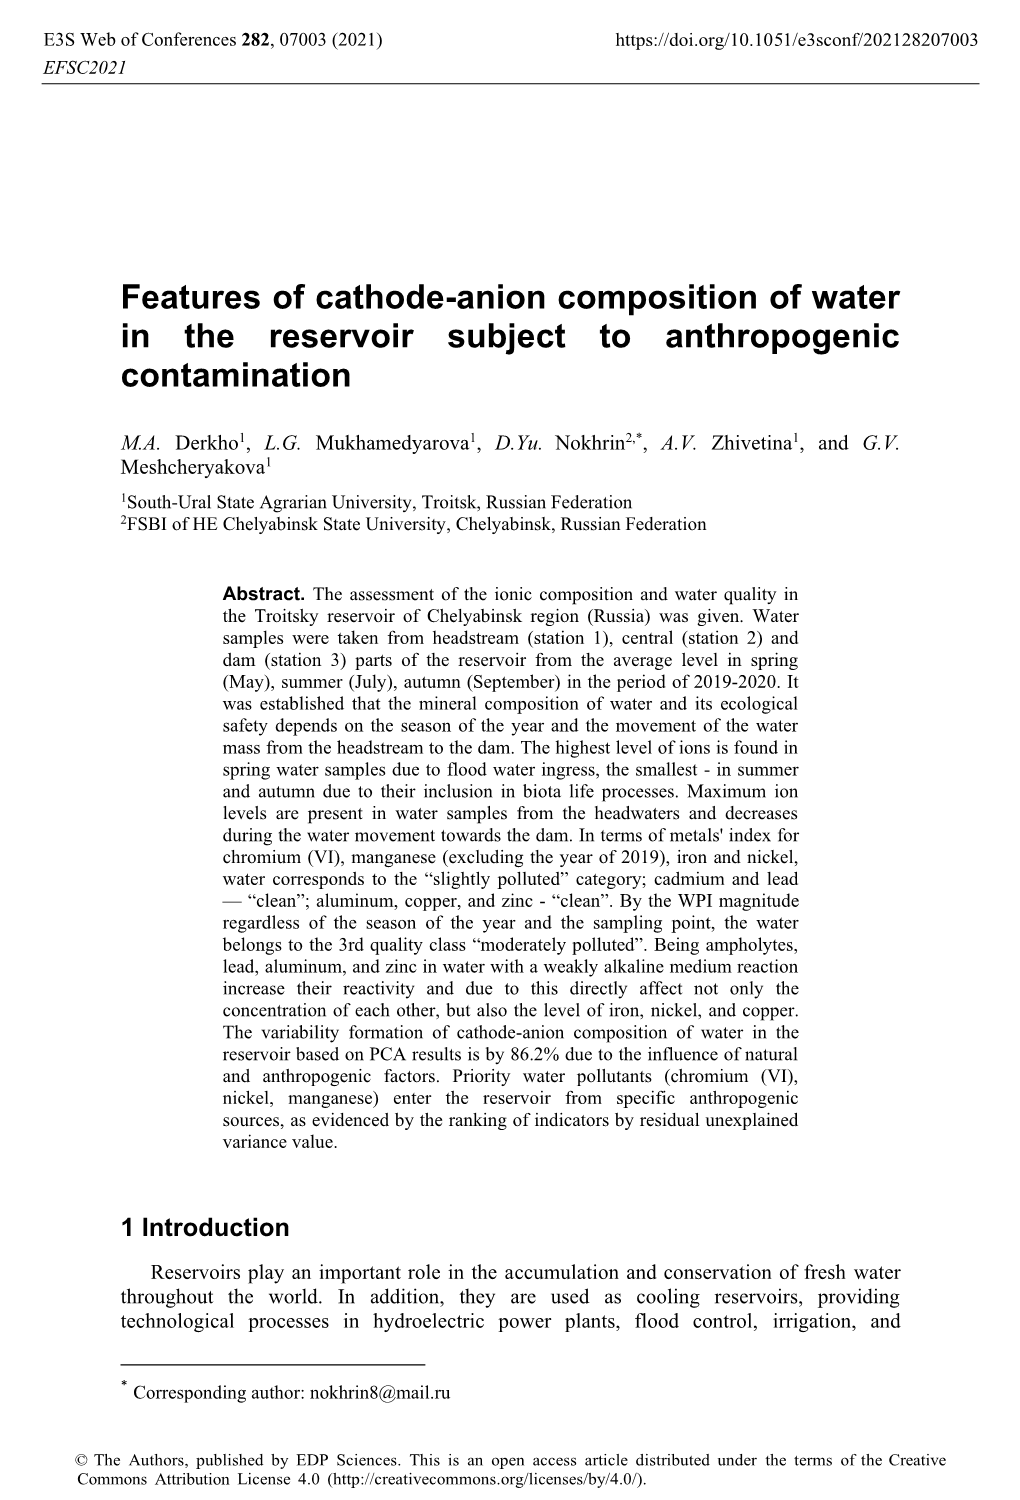 Features of Cathode-Anion Composition of Water in the Reservoir Subject to Anthropogenic Contamination